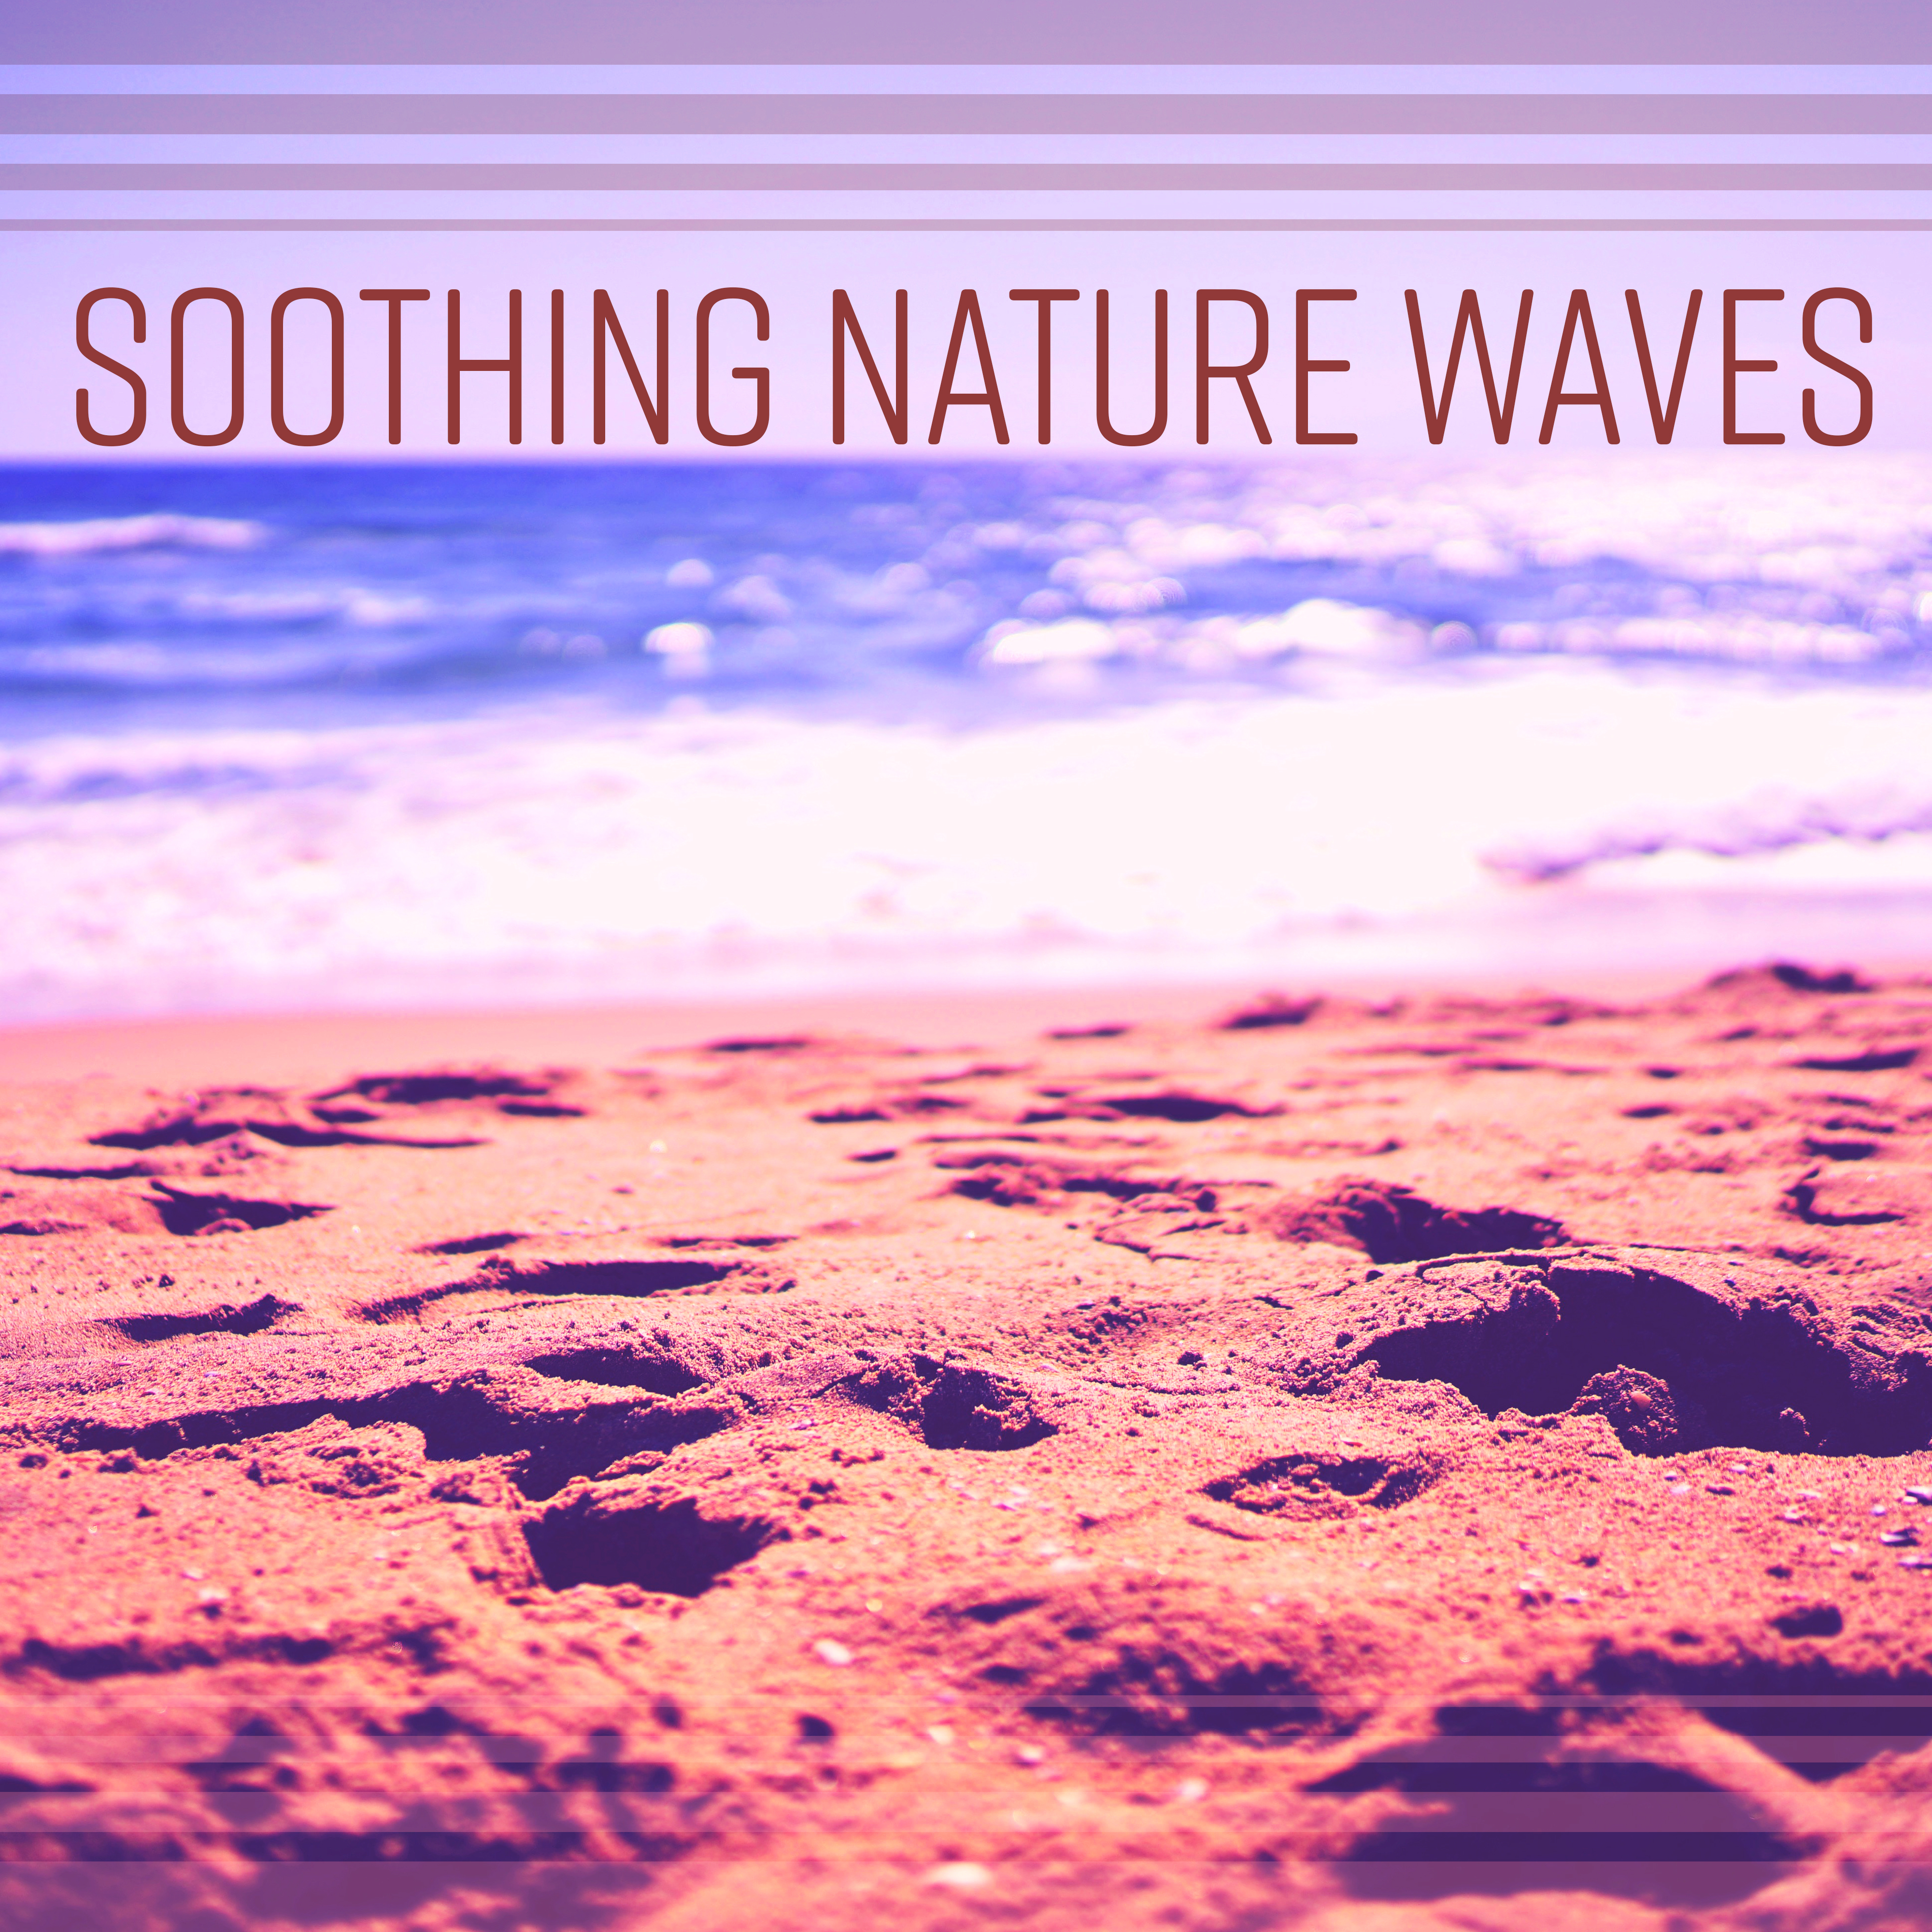 Soothing Nature Waves – Relaxing New Age Music, Waves of Calmness, Easy Listening, Soft Sounds